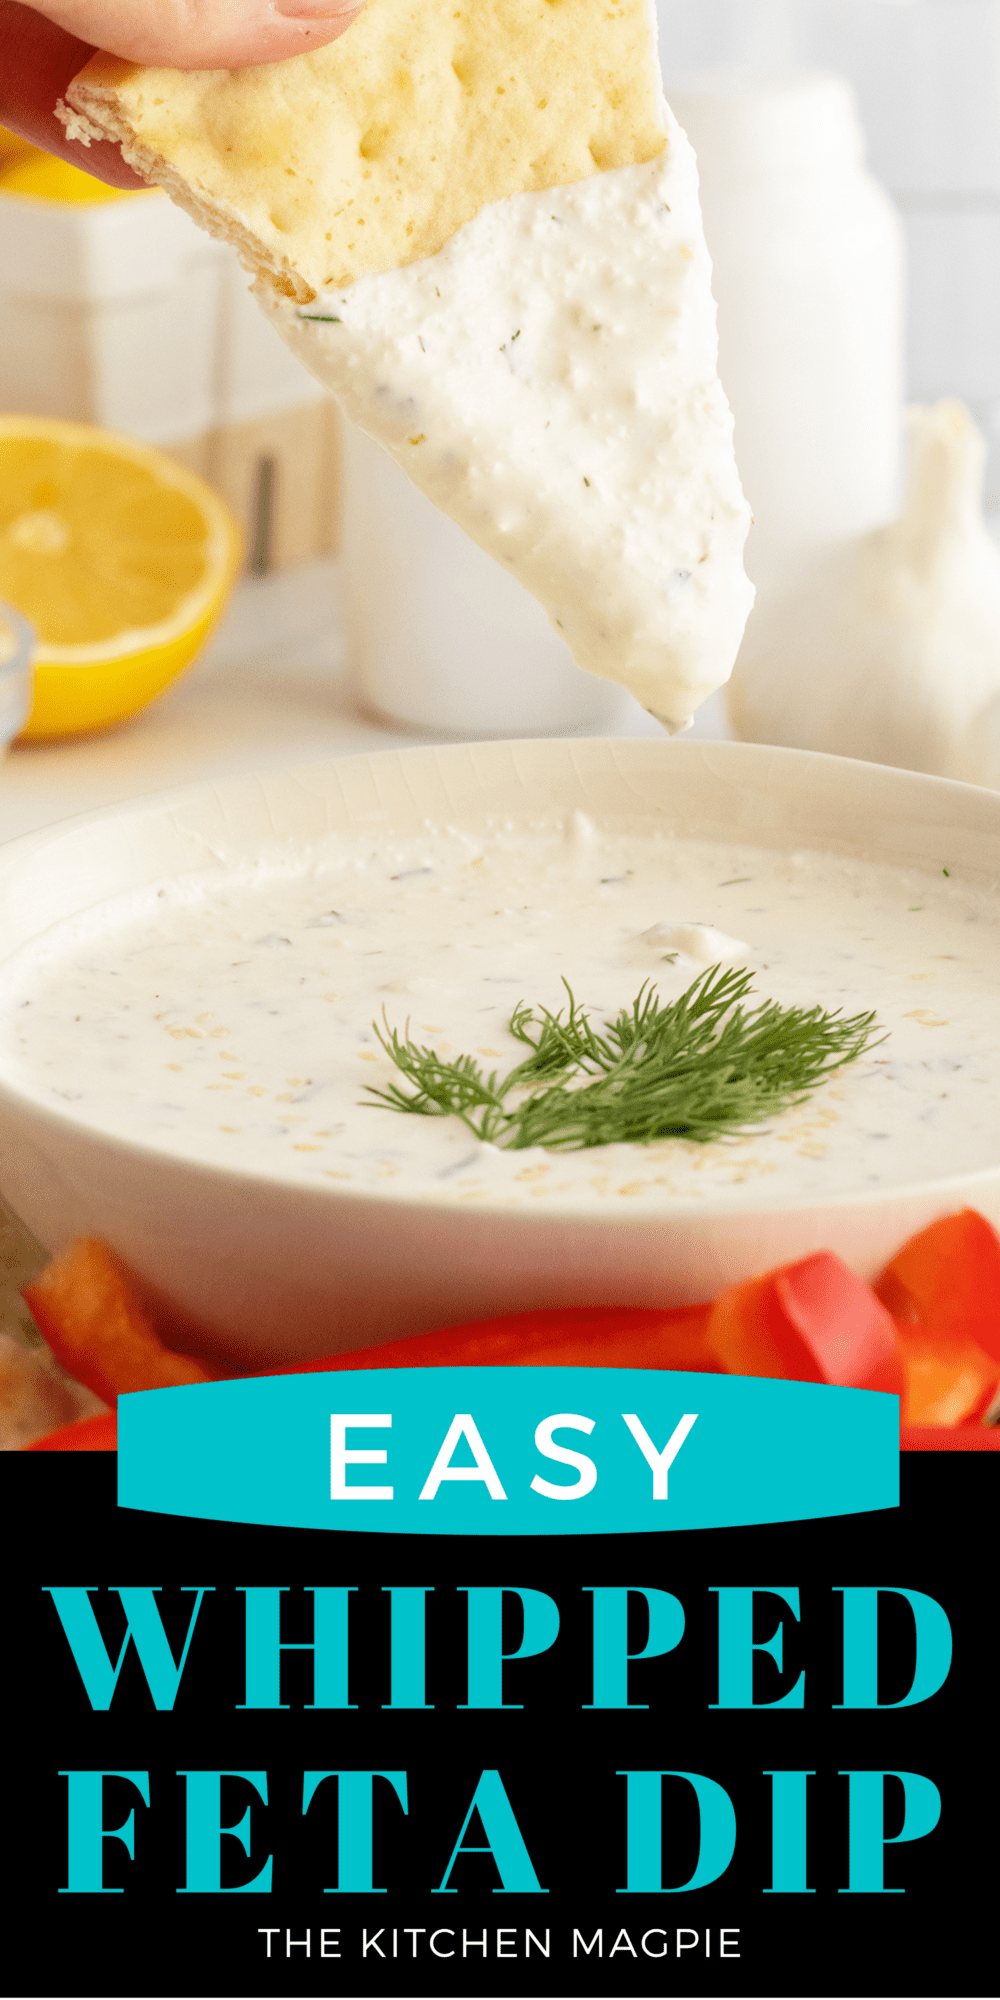 Try using feta to make this light, tangy and salty Mediterranean-inspired dip that would go perfectly with pita bread?